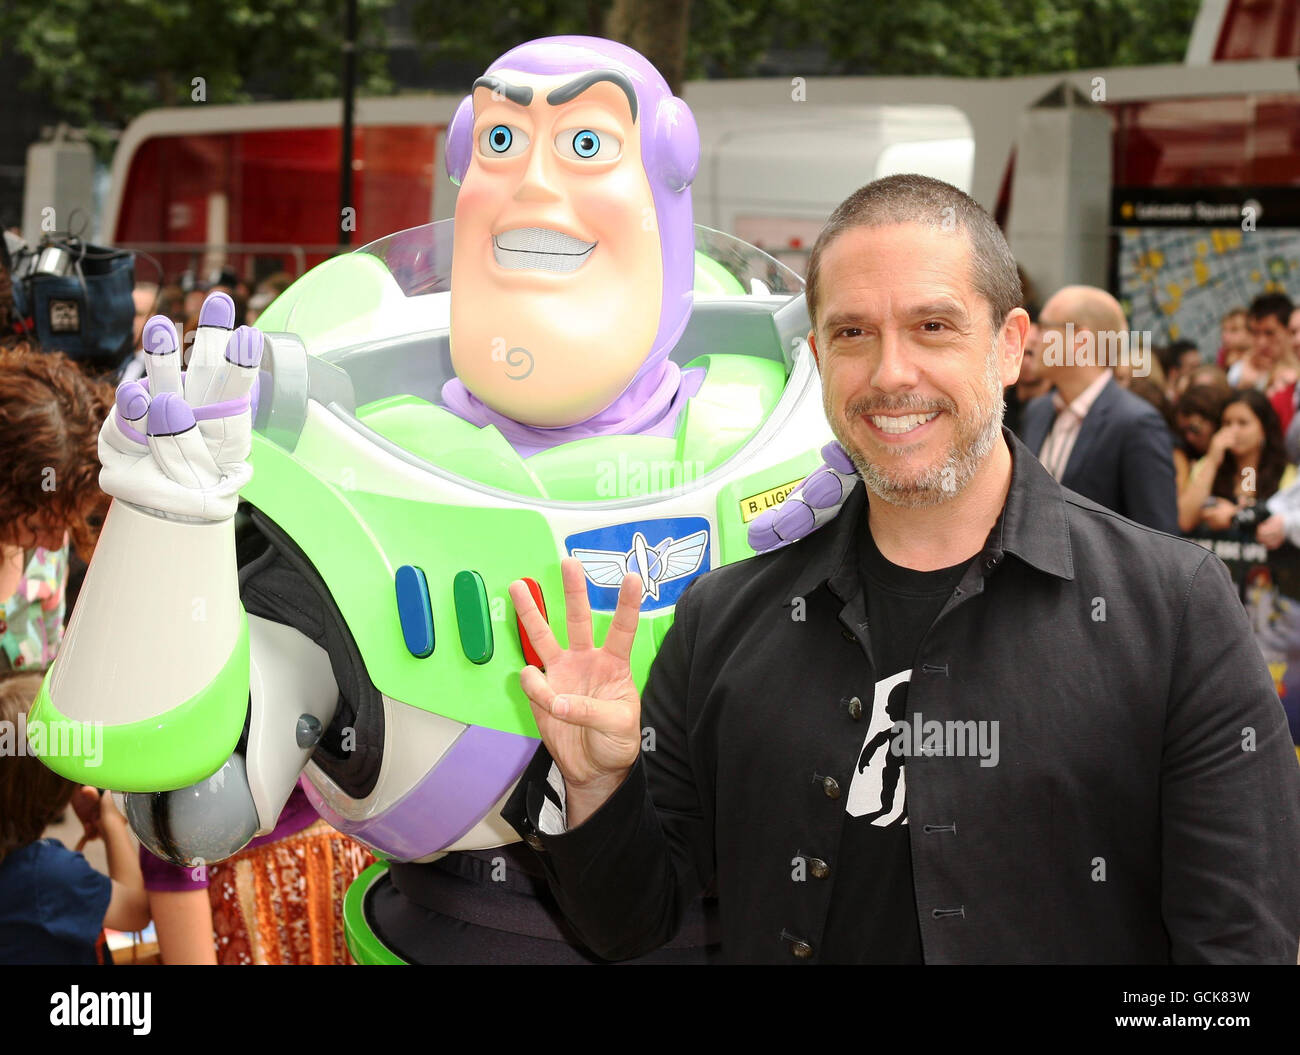 Toy Story 3 premiere - London. Director Lee Unkrich arrives at the UK premiere of Toy Story 3 in Leicester Square, central London. Stock Photo